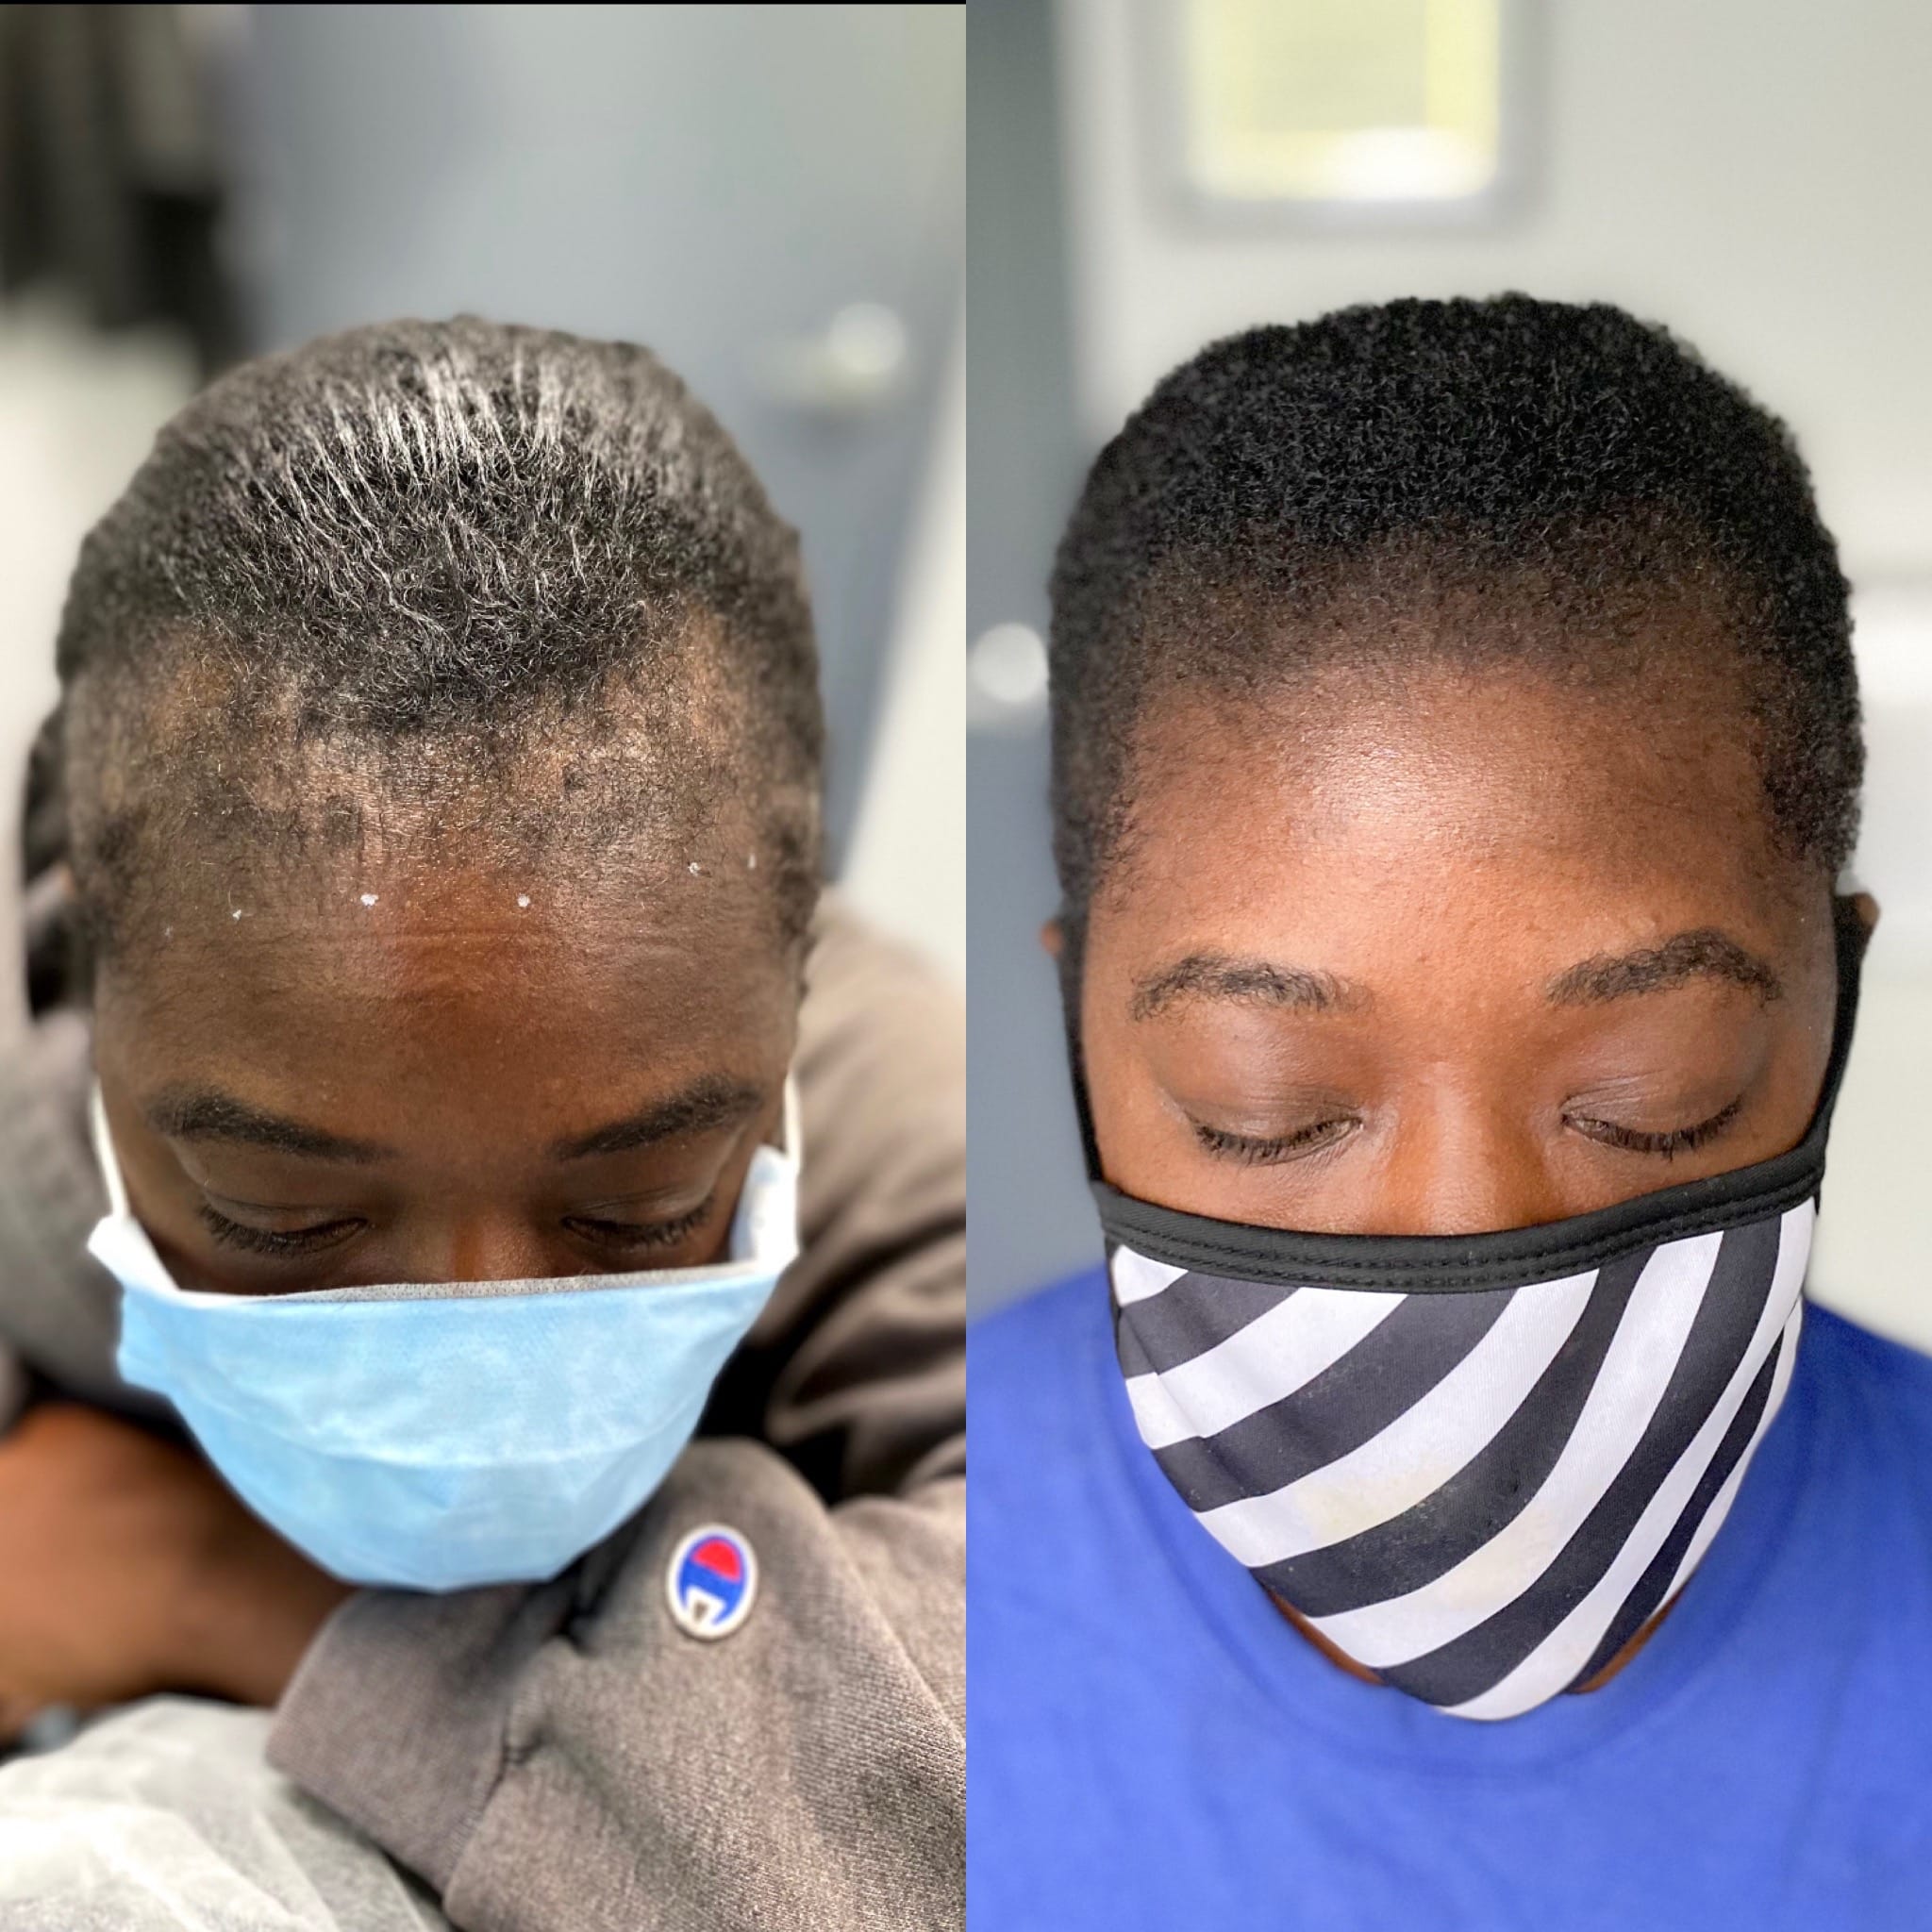 Before and fter photo of black /African American woman's traction alopecia scalp micropigmentation treatment